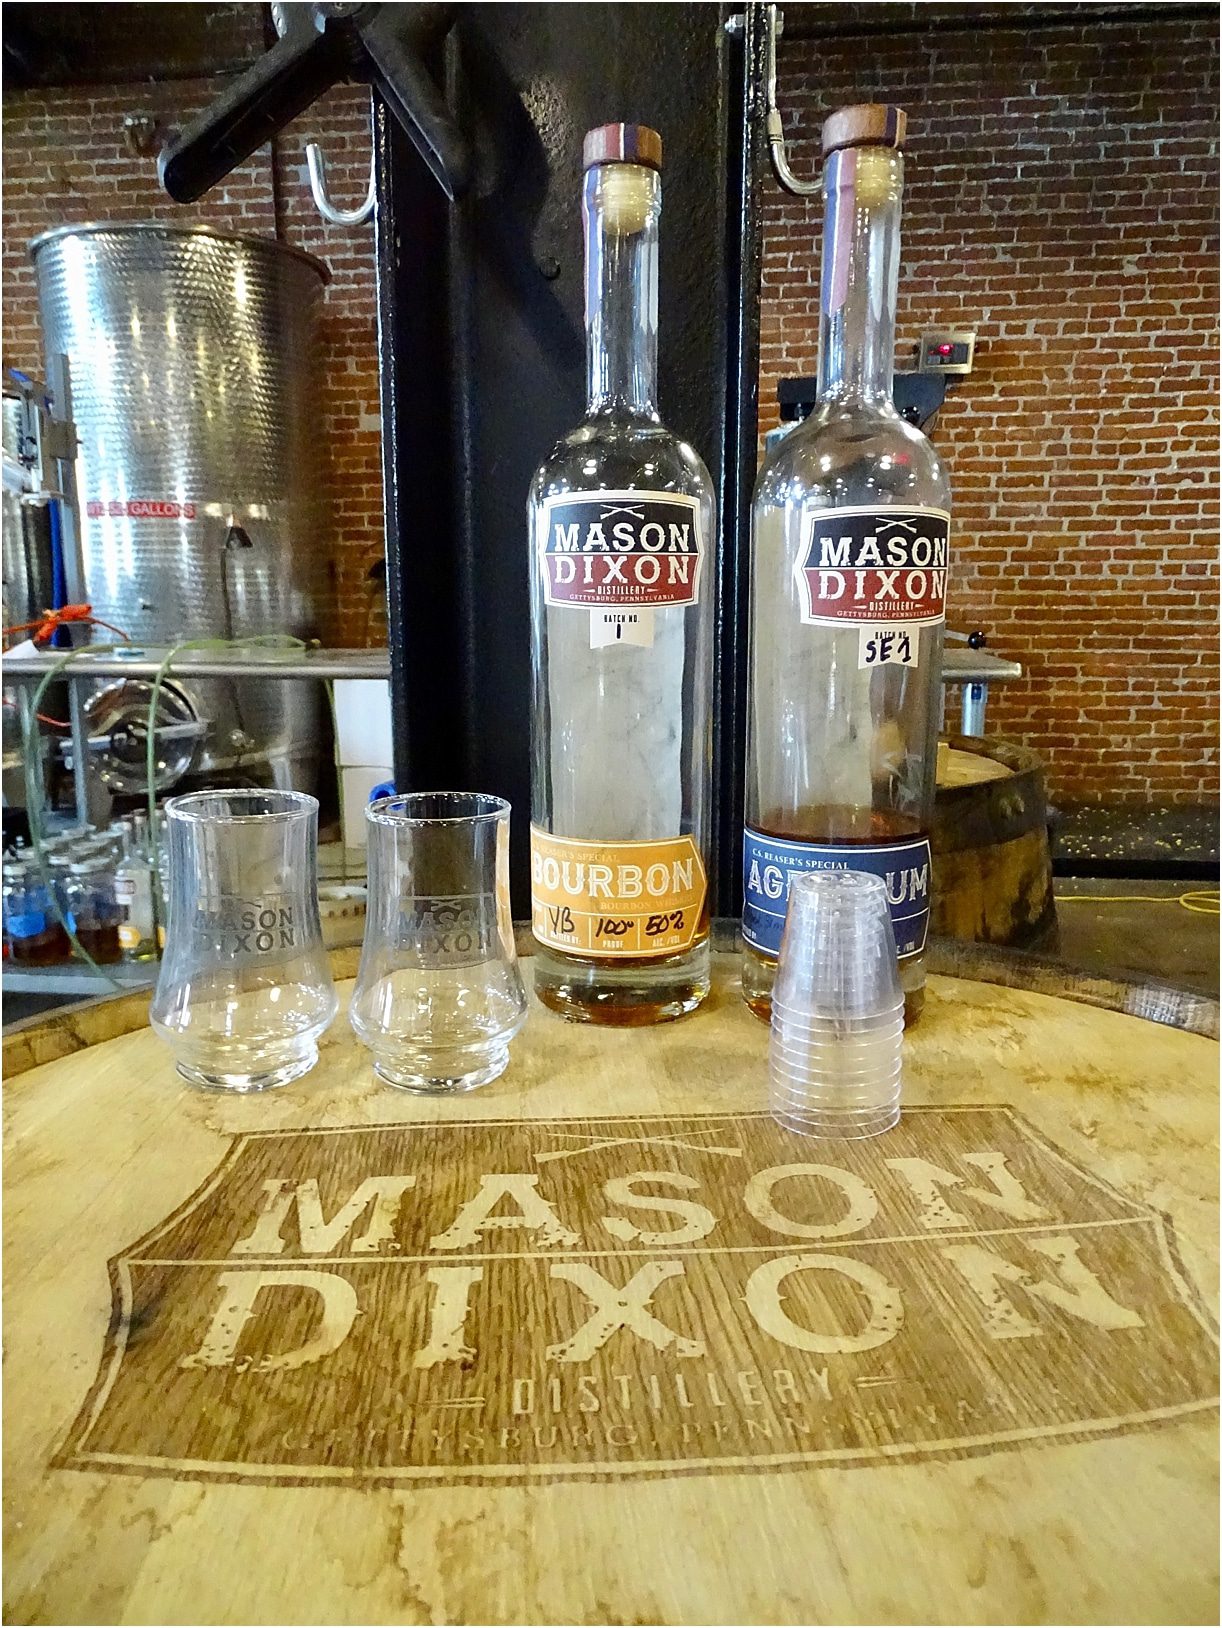 Hill City Bride | Getaway Weekend for Two | Travel for Couples Adams County Pour Tour Gettysburg Mason Dixon Distillery